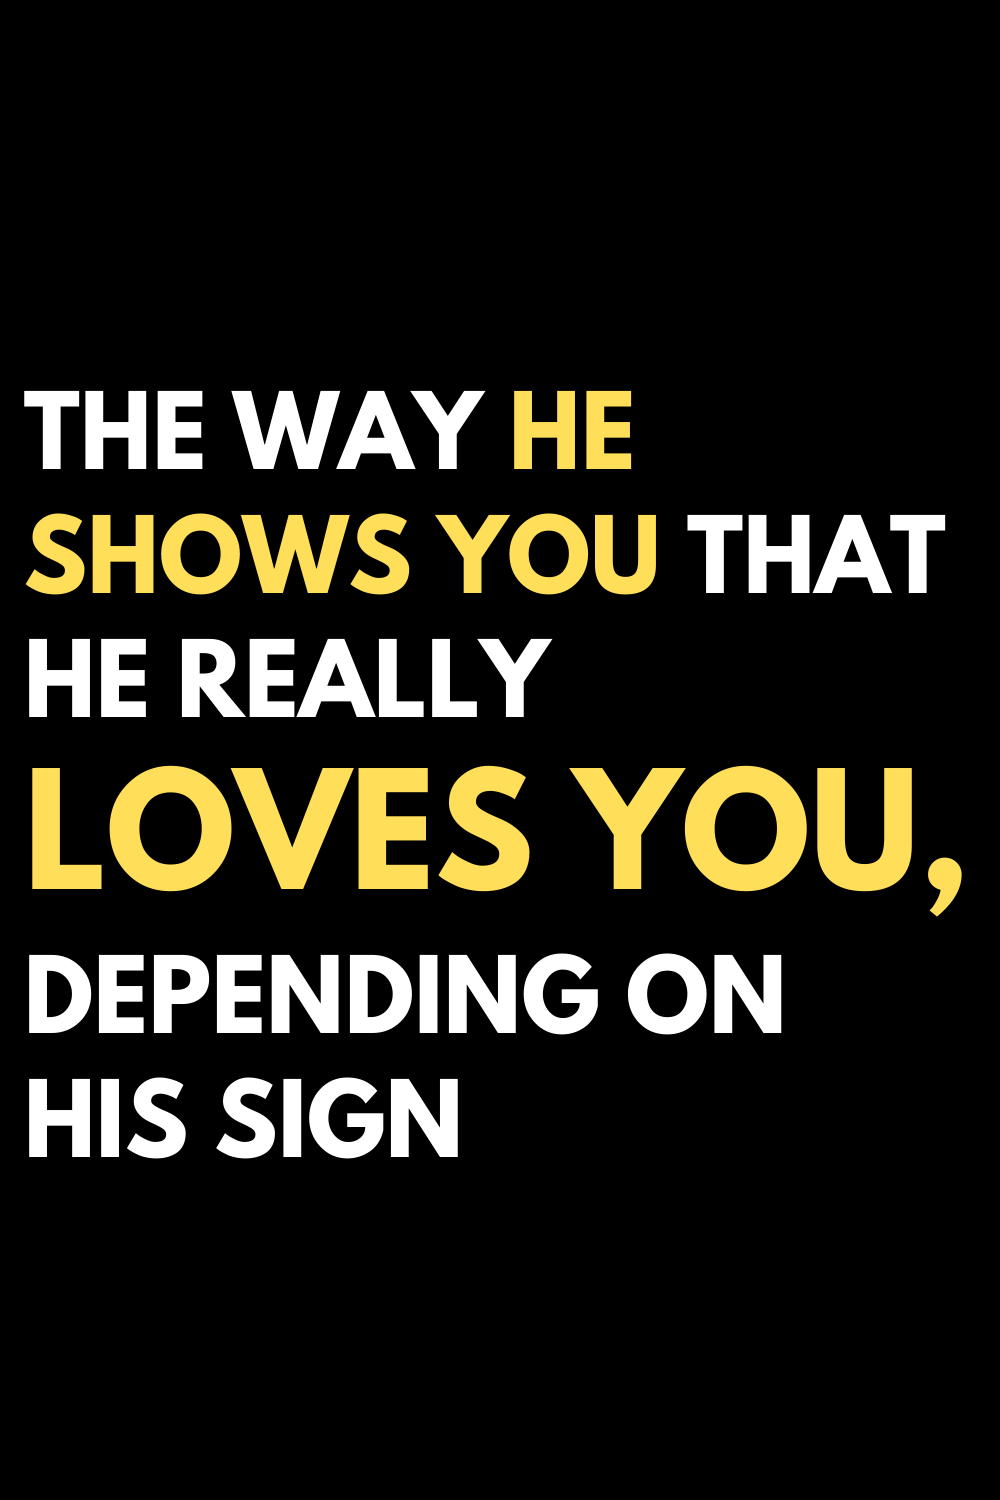 The way he shows you that he really loves you, depending on his sign